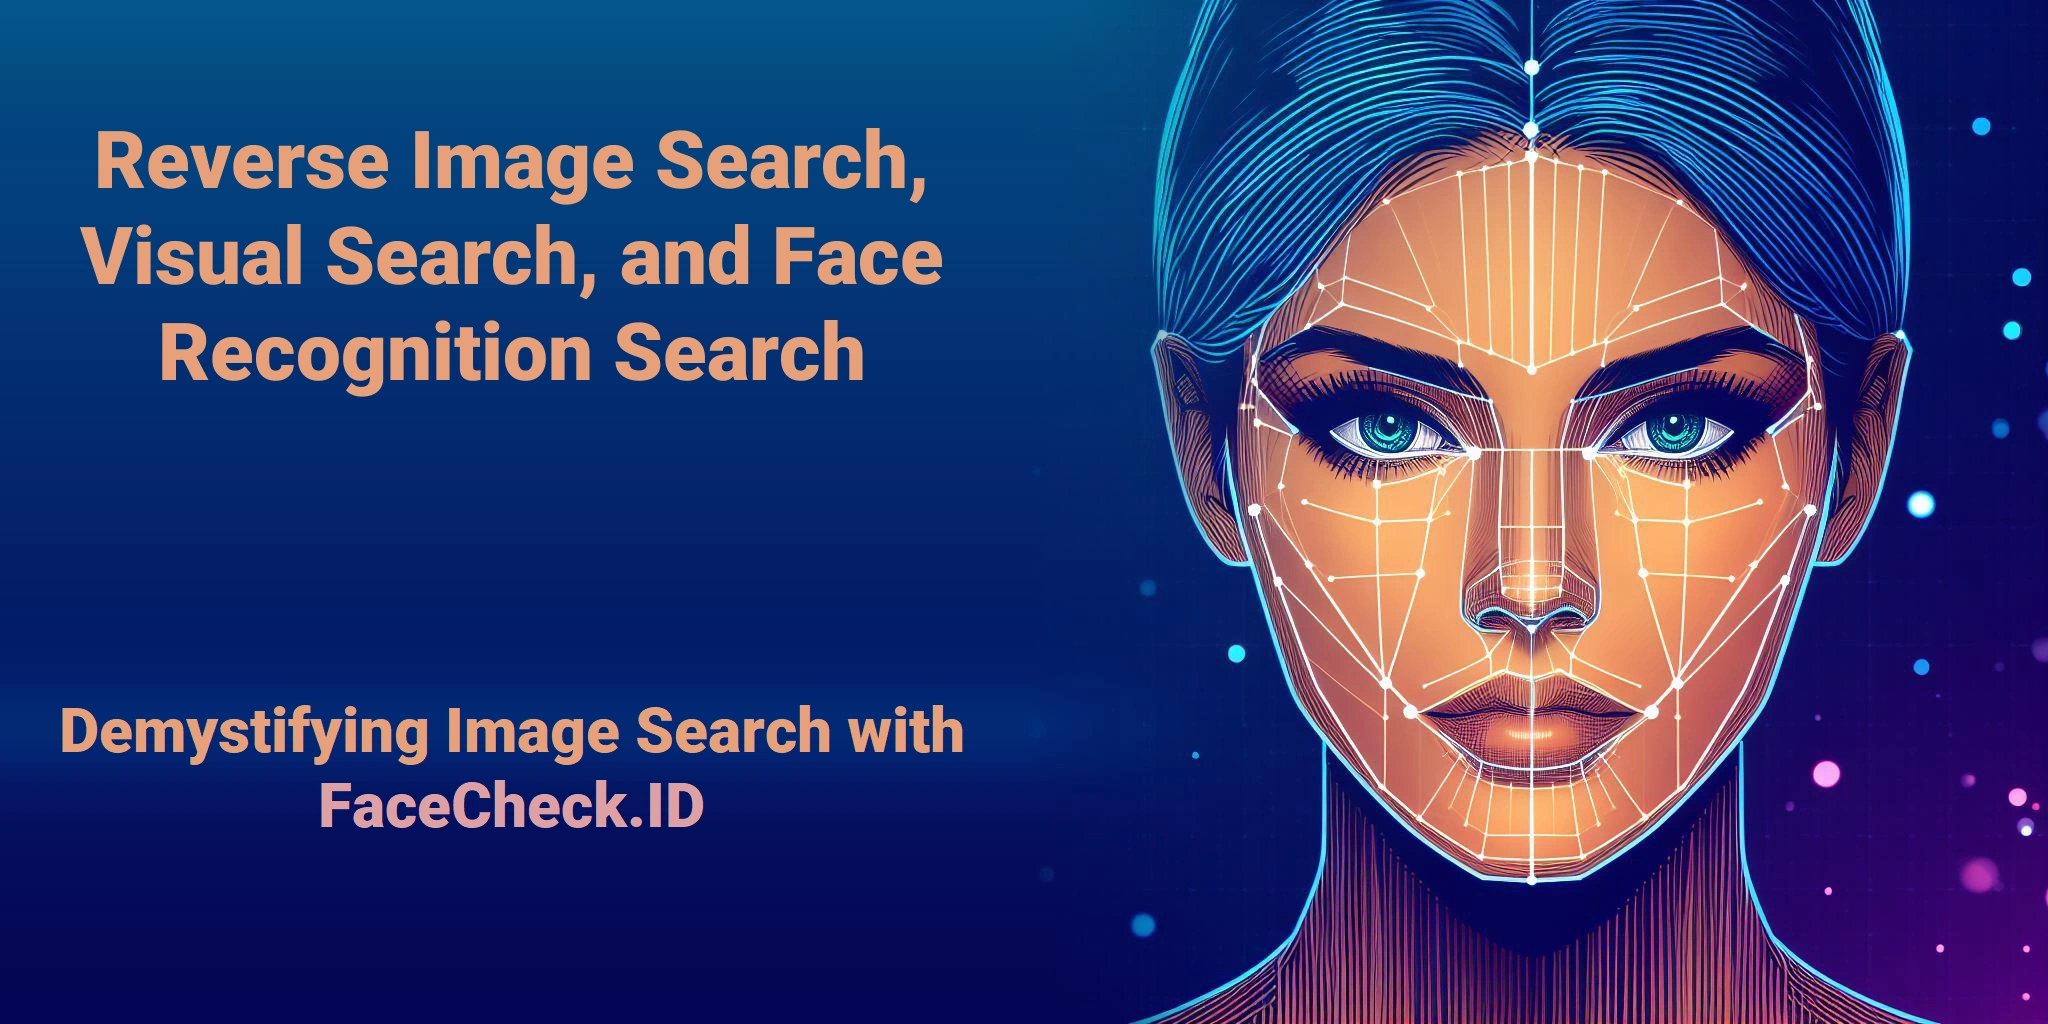 Reverse Image Search, Visual Search, and Face Recognition Search Demystifying Image Search with FaceCheck.ID